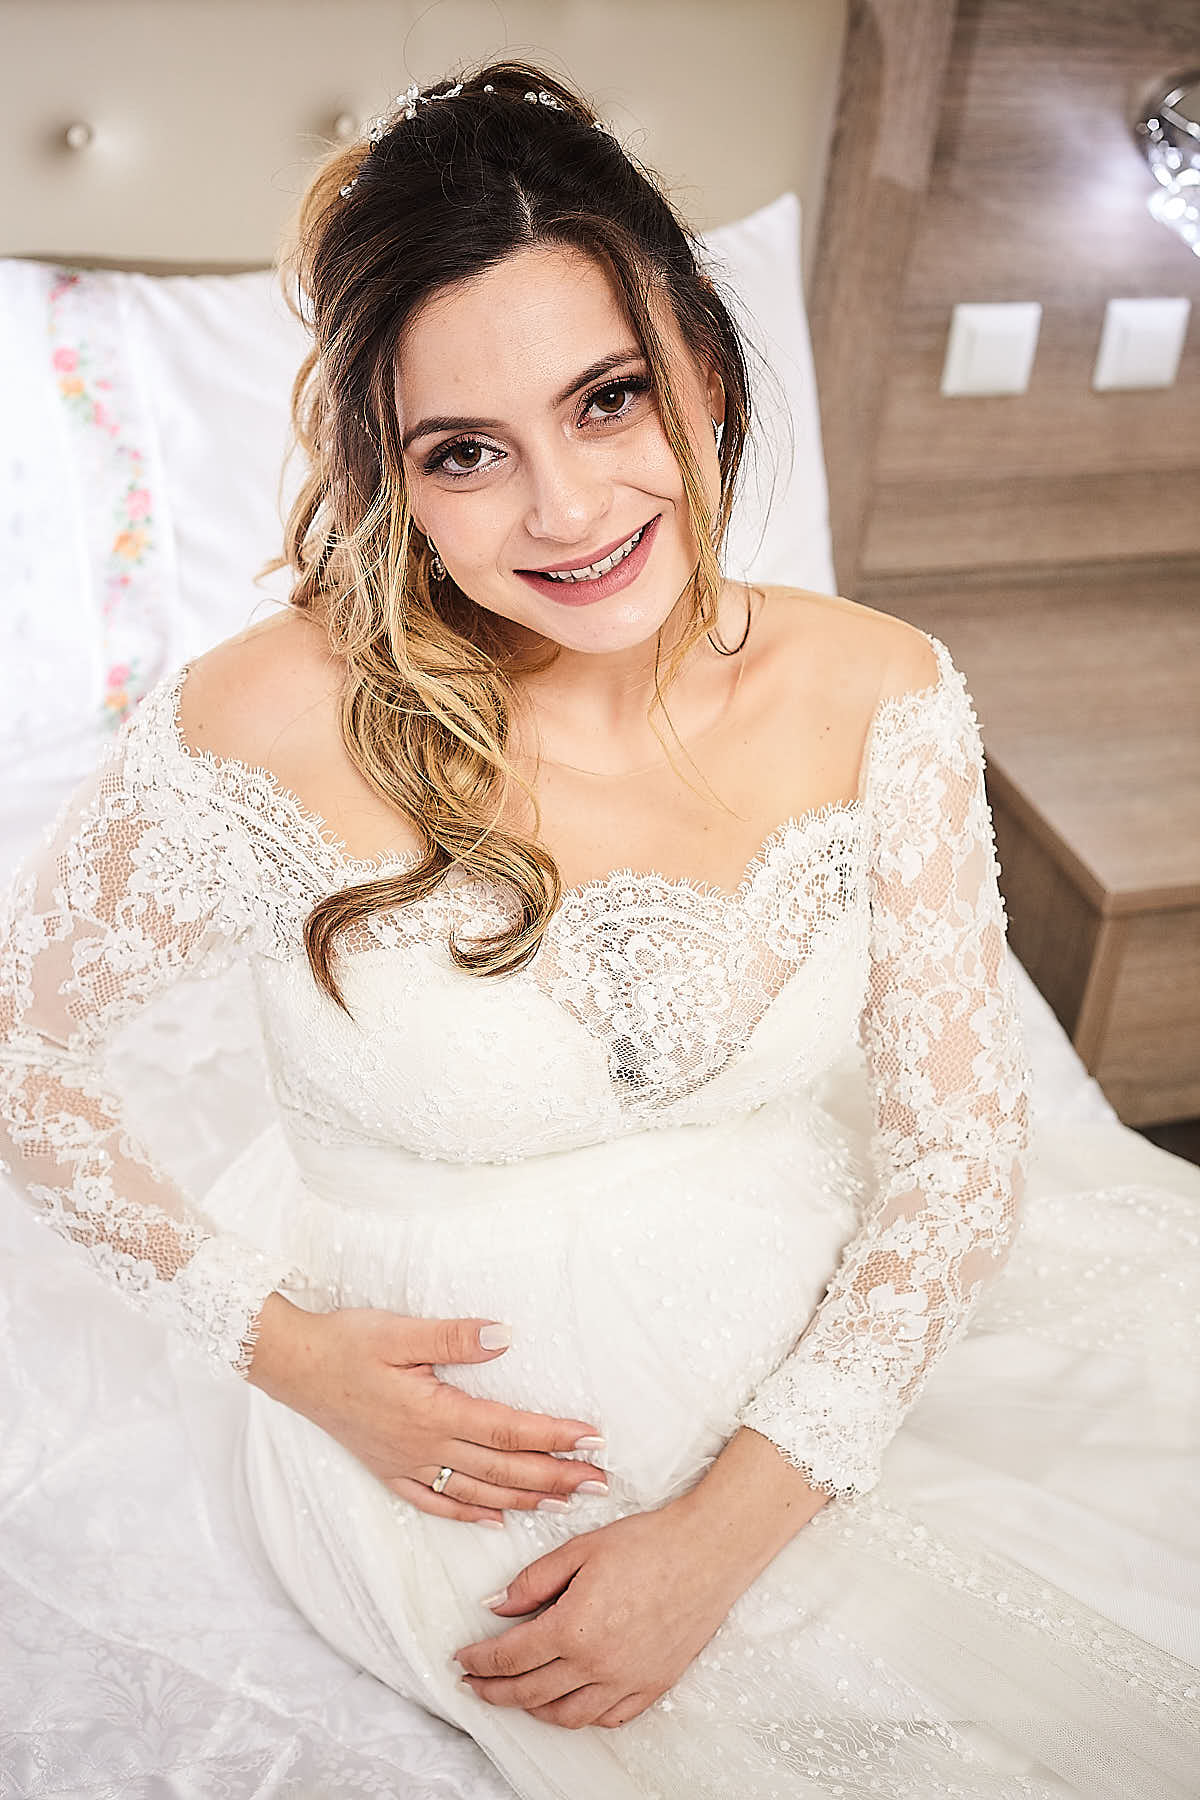 Pregnant bride touching her belly and smiling